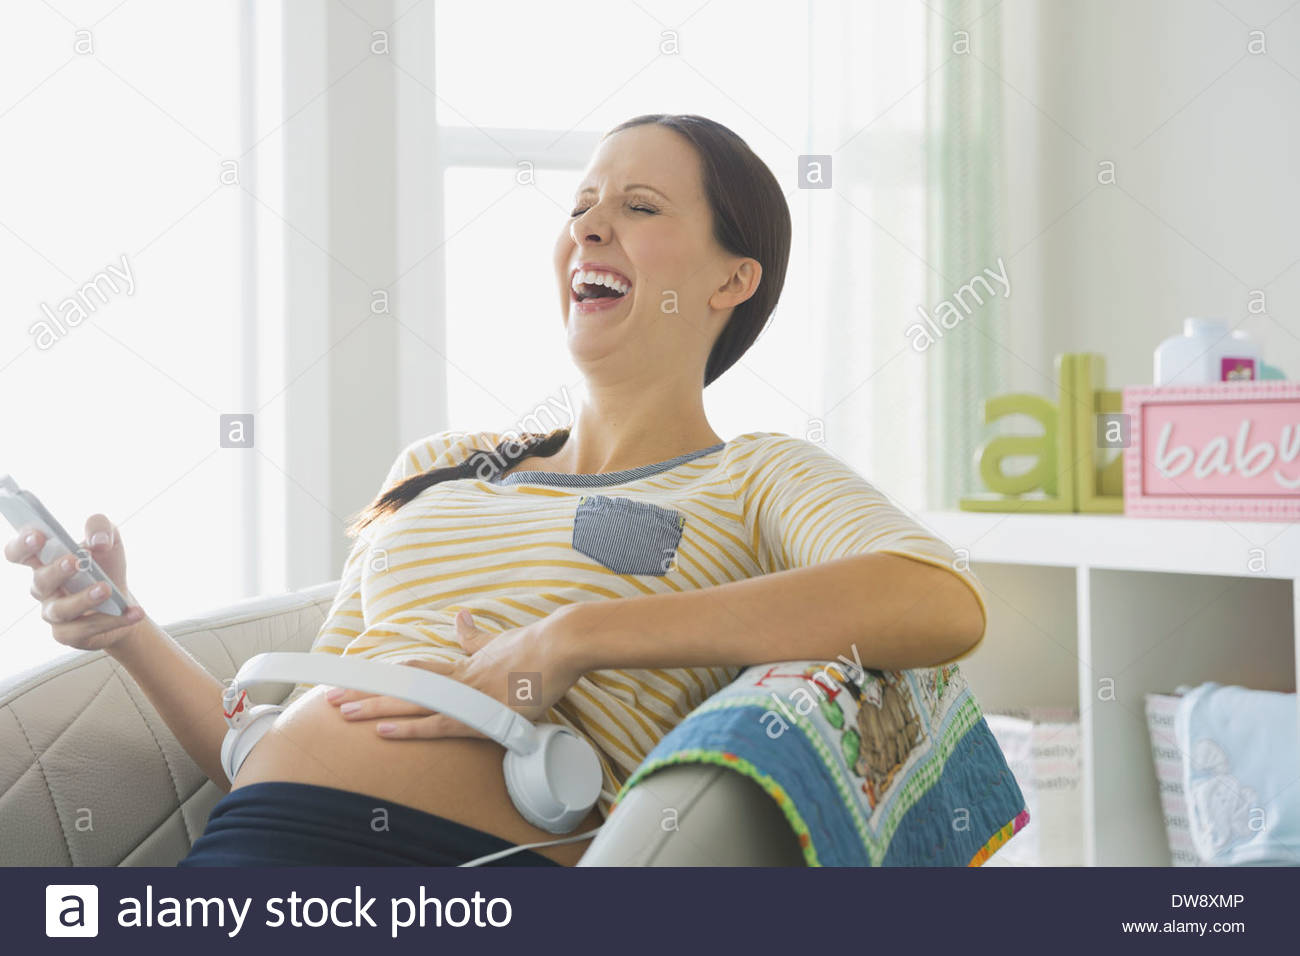 Pregnant woman with headphones on her belly Stock Photo